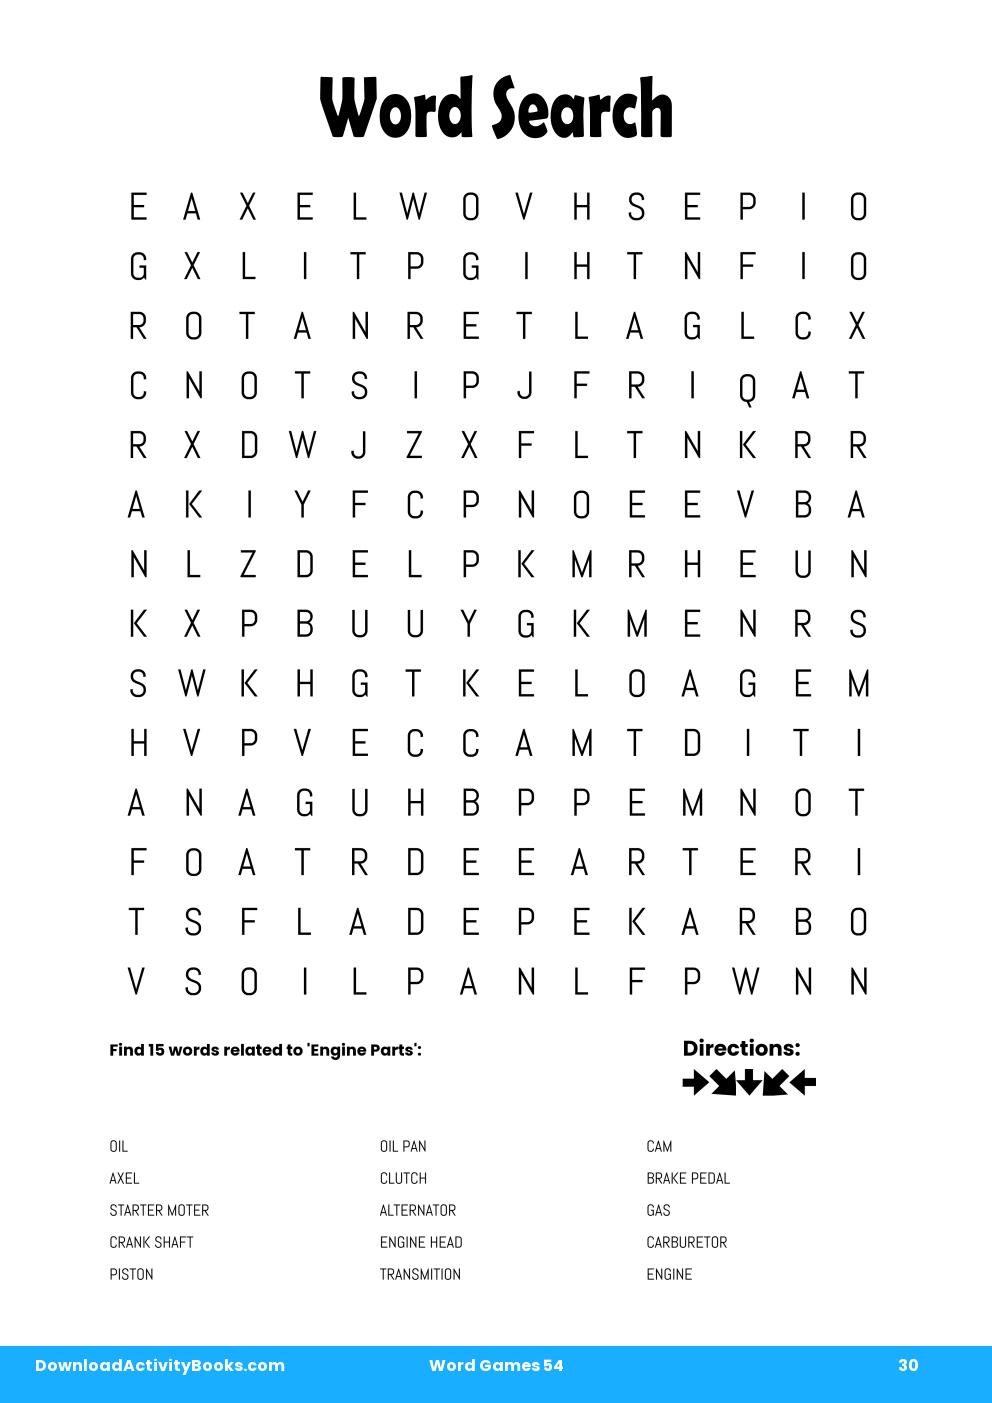 Word Search in Word Games 54